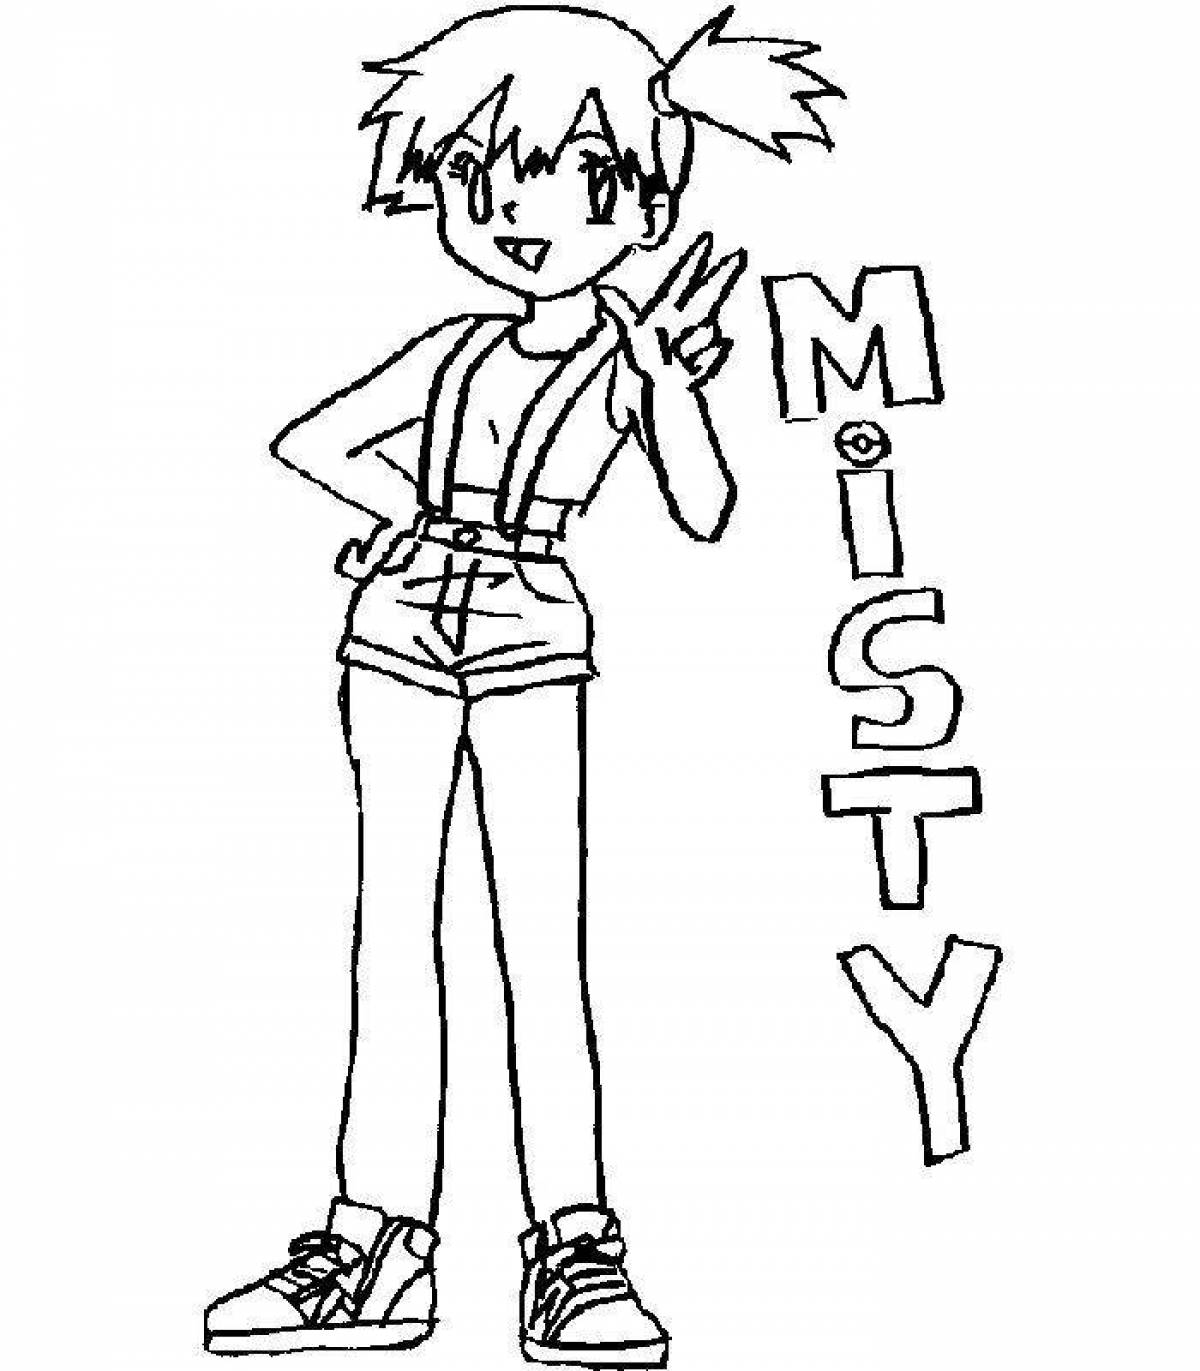 Coloring misty - tempting